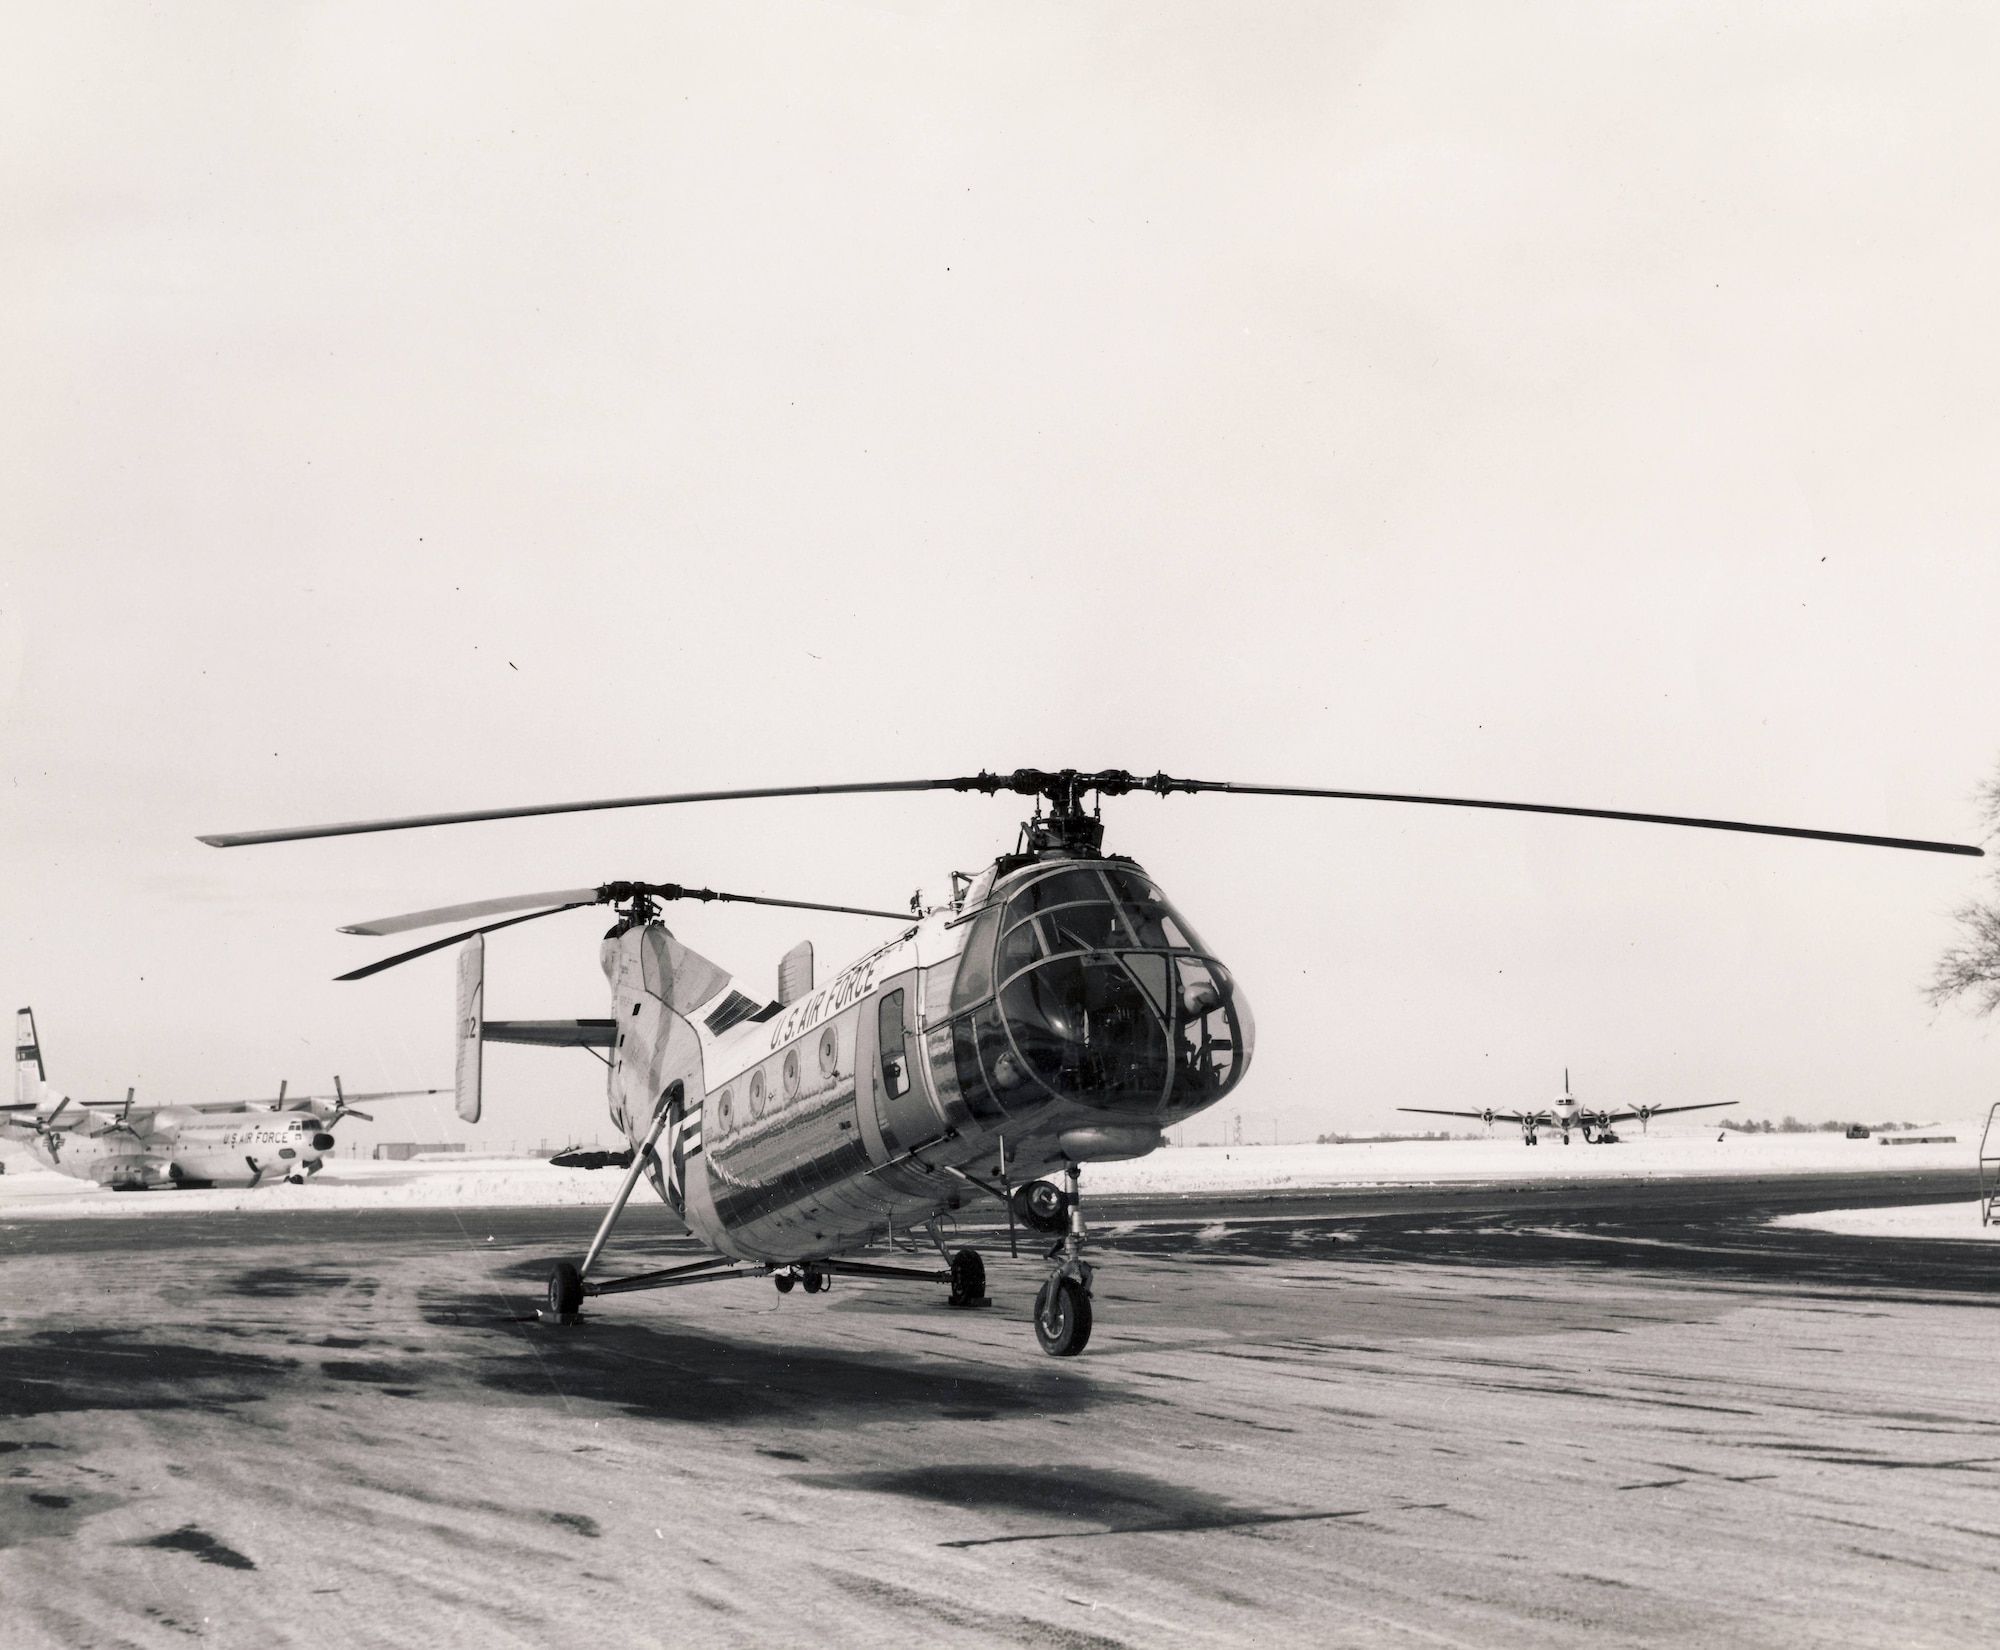 The Hill Air Force Range transferred the last of its three Piasecki H-21 Workhorse helicopters to the recently activated 1550th Aircrew Training and Test Wing in June 1971. The unit used it as a ground trainer.